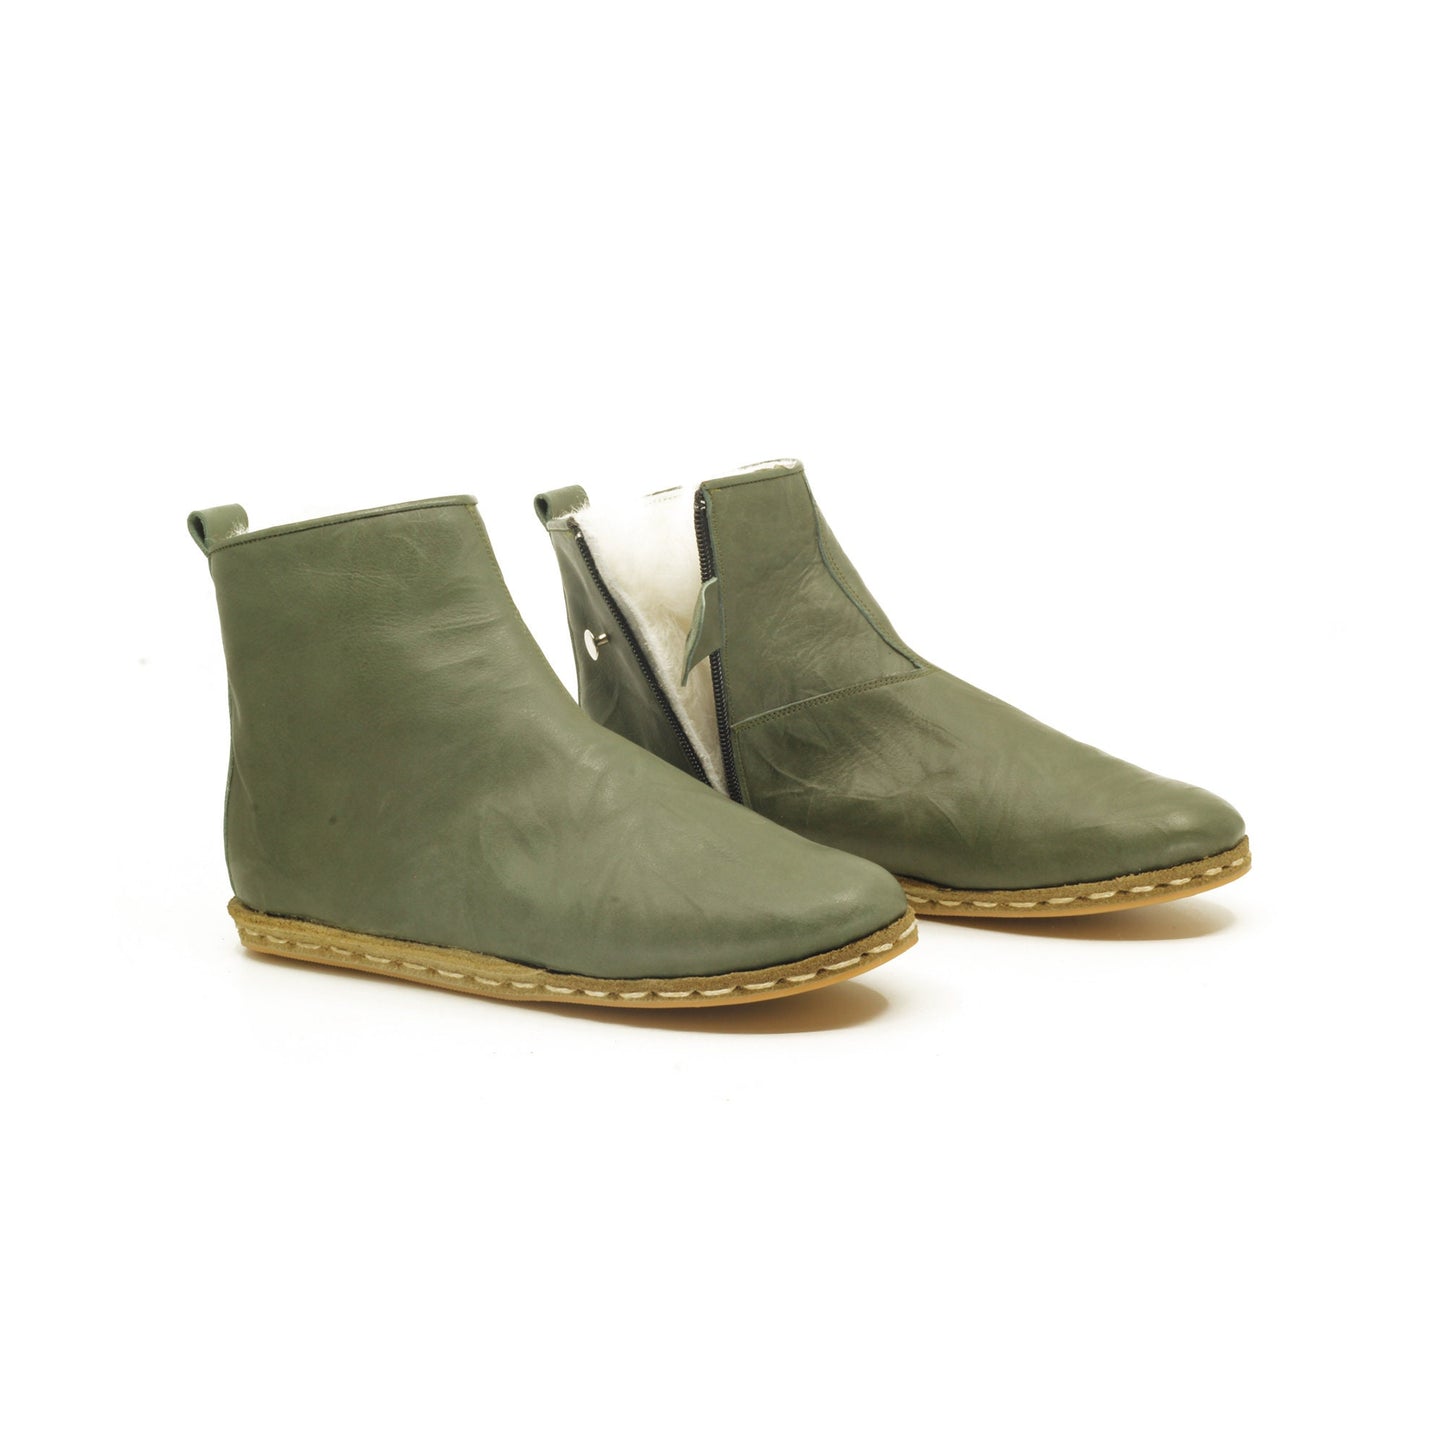 Women's Boot, Real Tuscan Fur Inside, All Leather, Matte Green